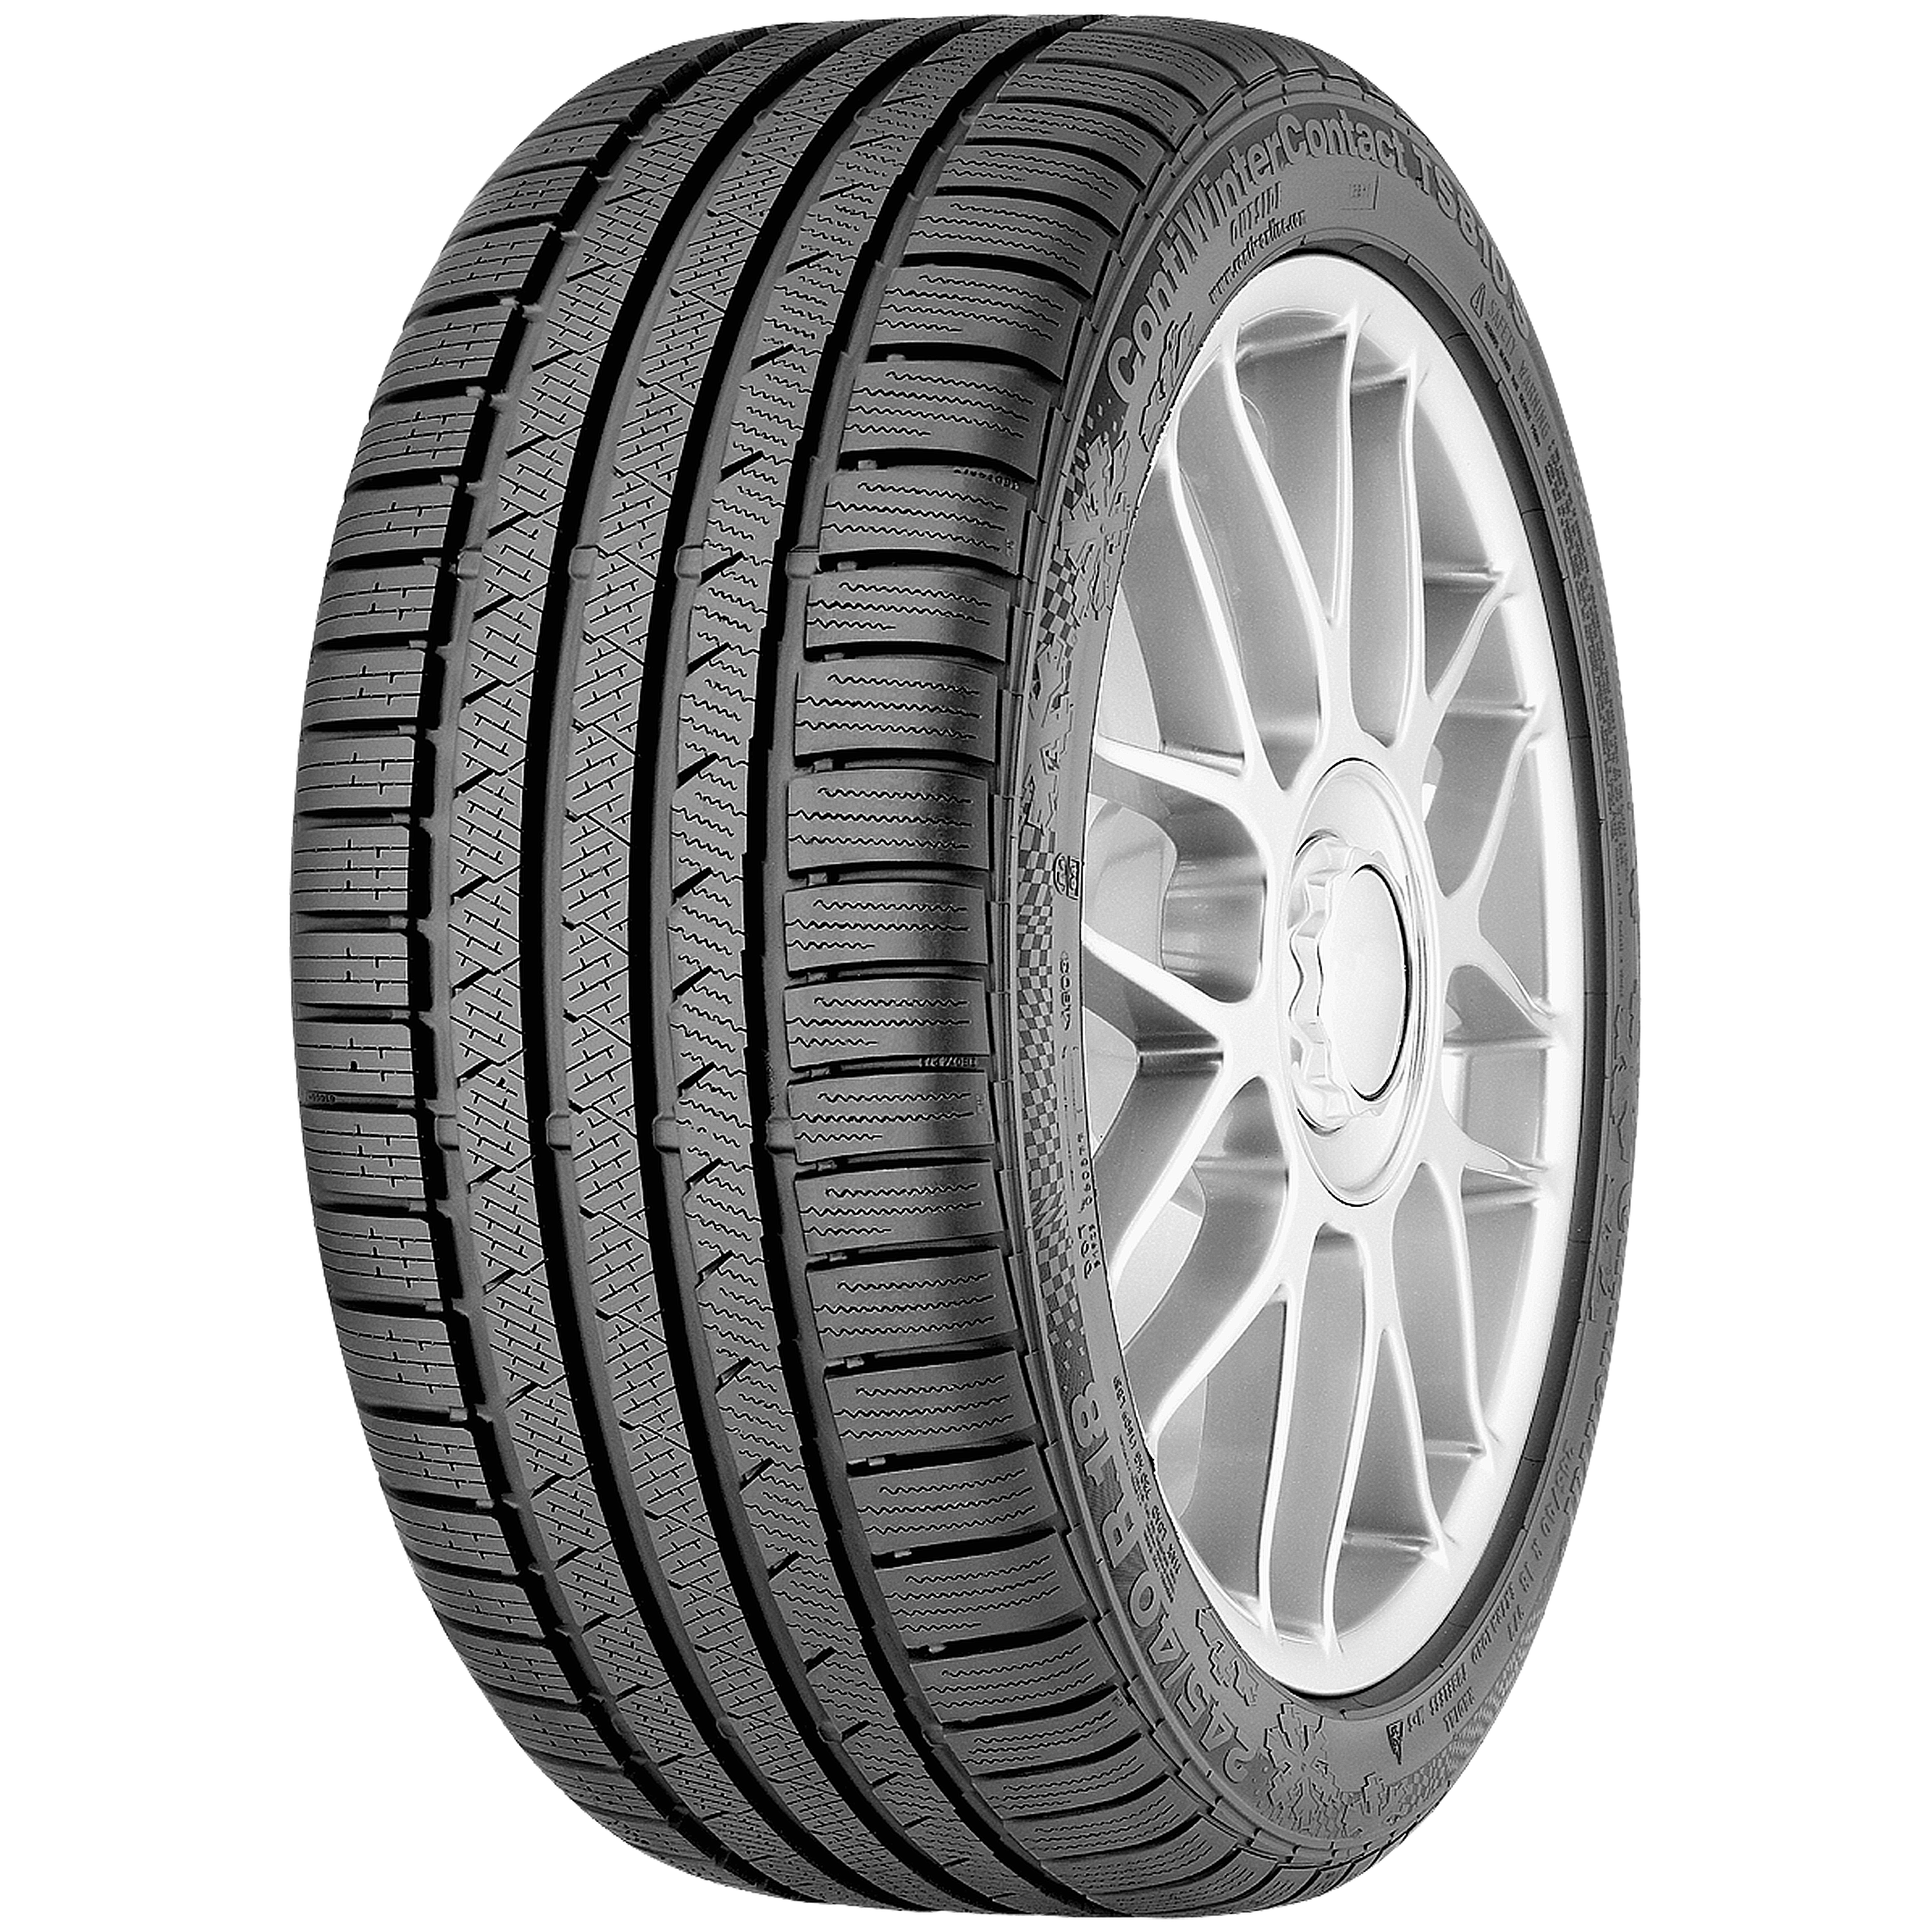 tire TS medium S: powerful 810 luxury-class and cars sporty for The winter ContiWinterContact